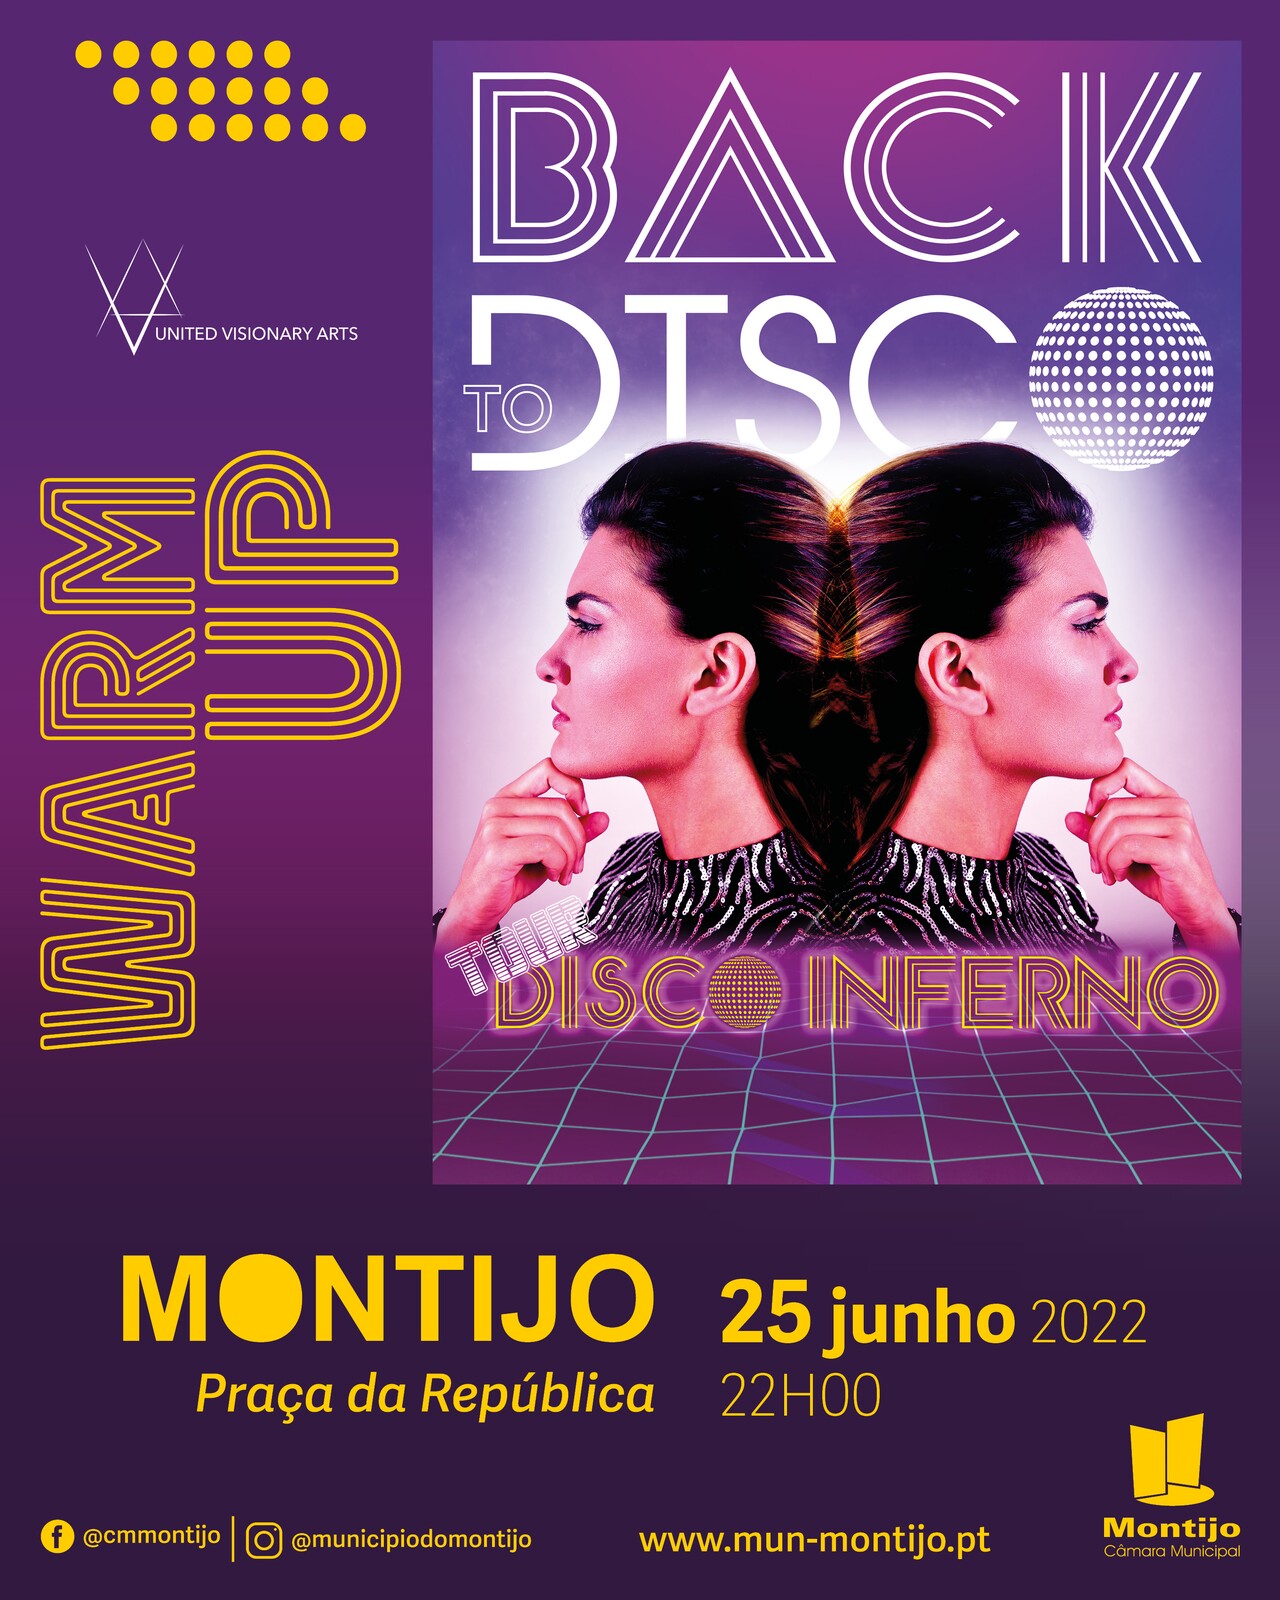 WARM UP Montijo BACK TO DISCO 960x1200px_redes sociais